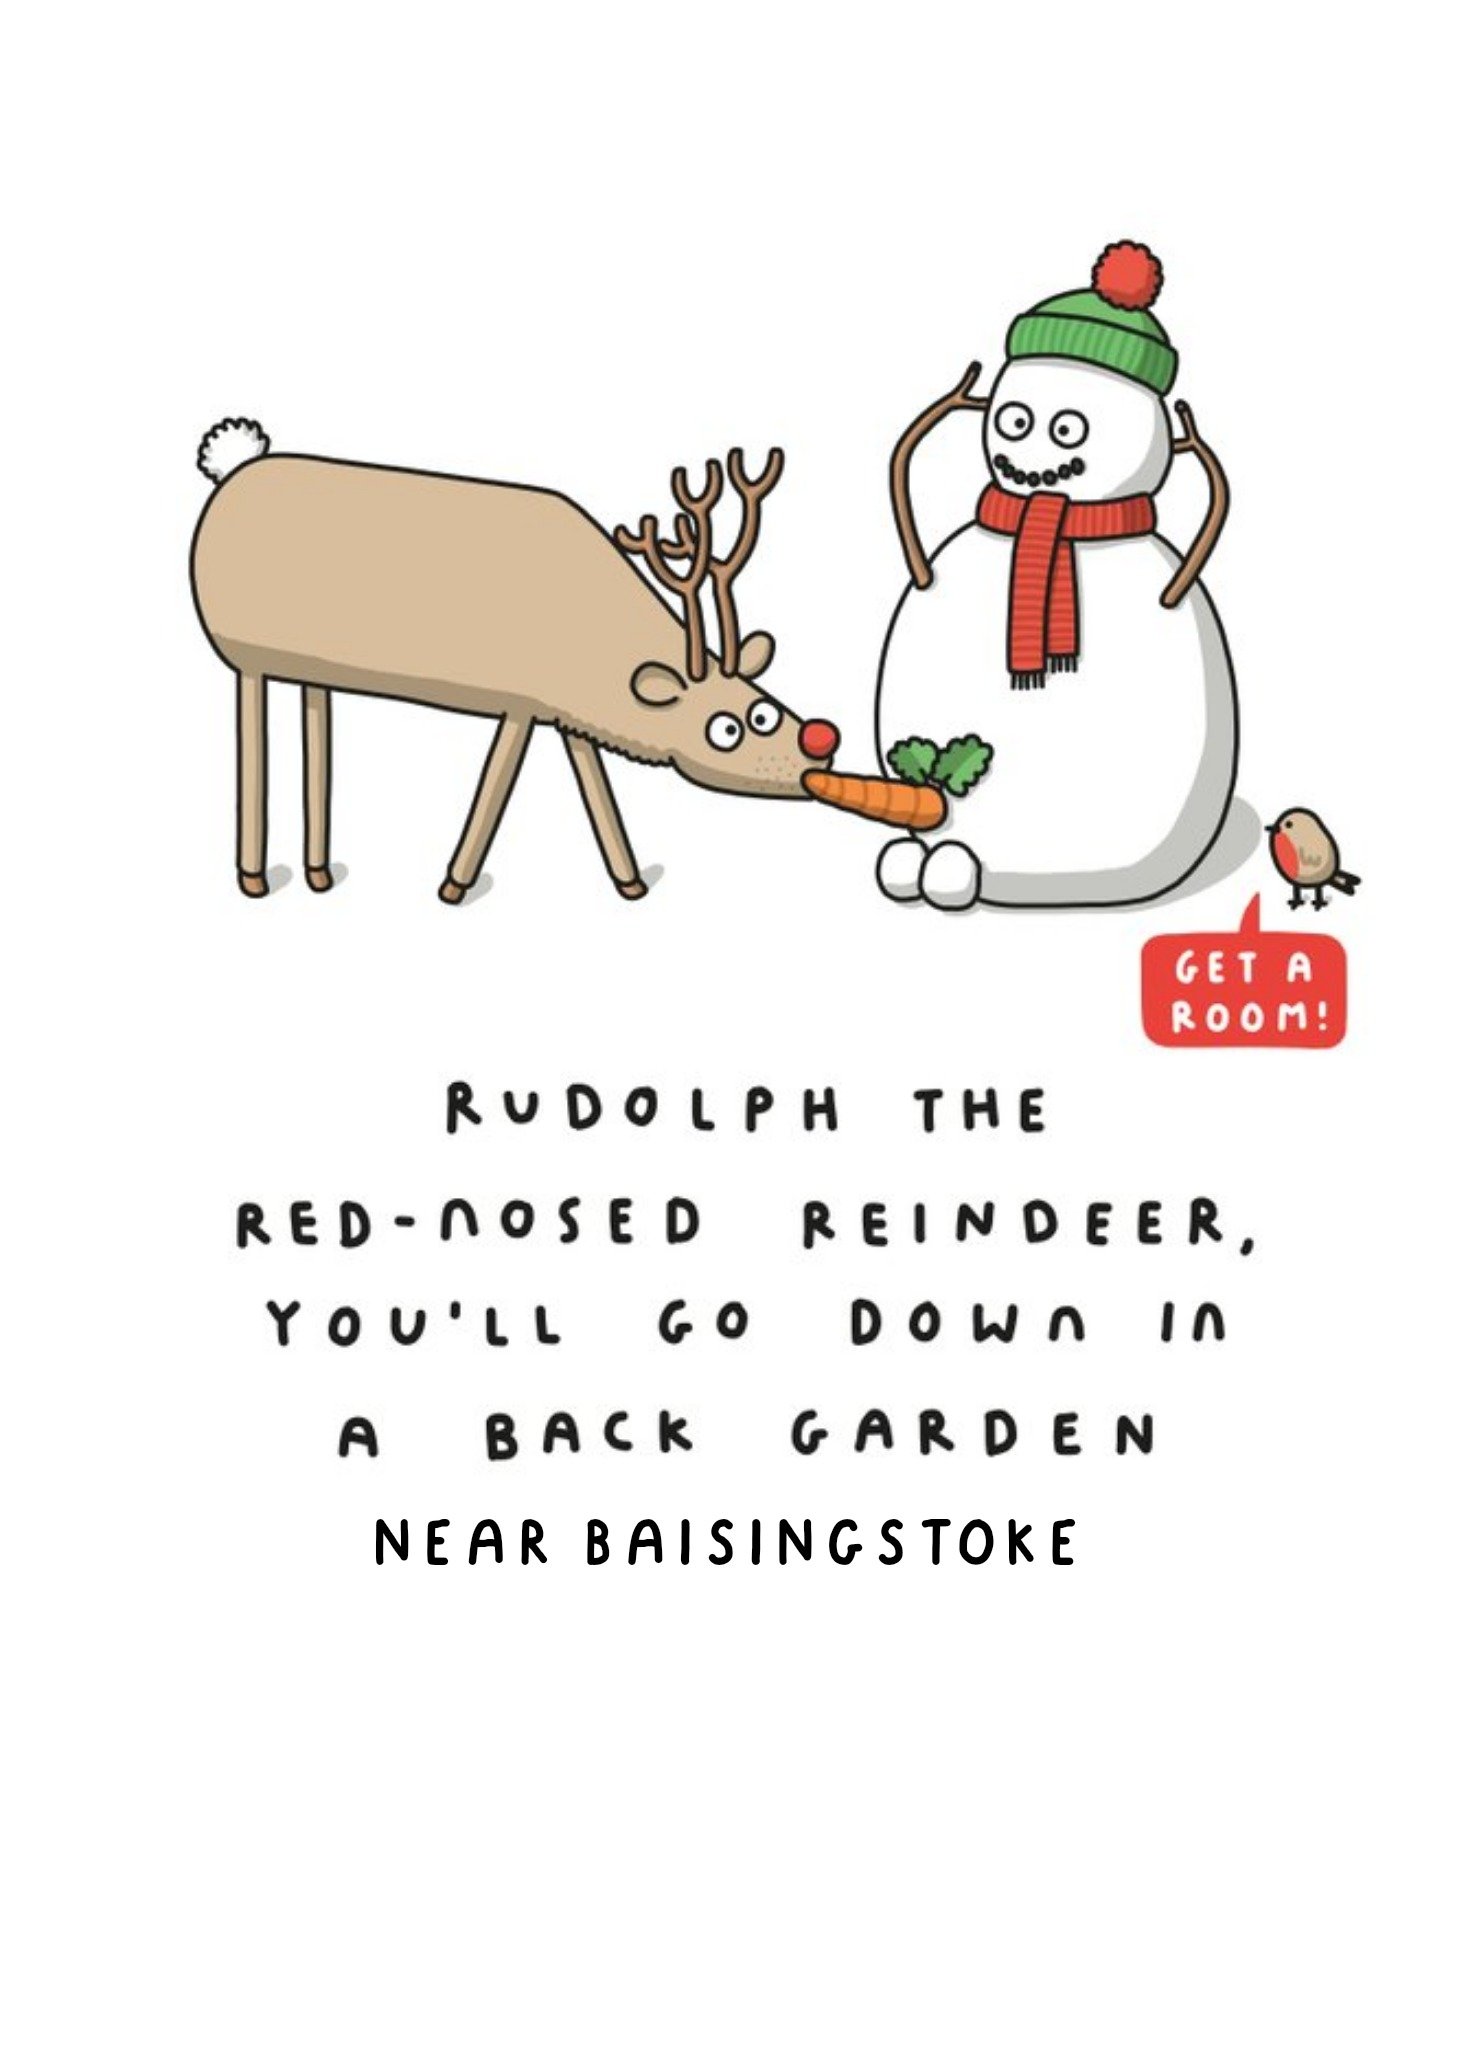 Moonpig Mungo And Shoddy Rudolph The Red Nosed Reindeer Rude Christmas Card Ecard